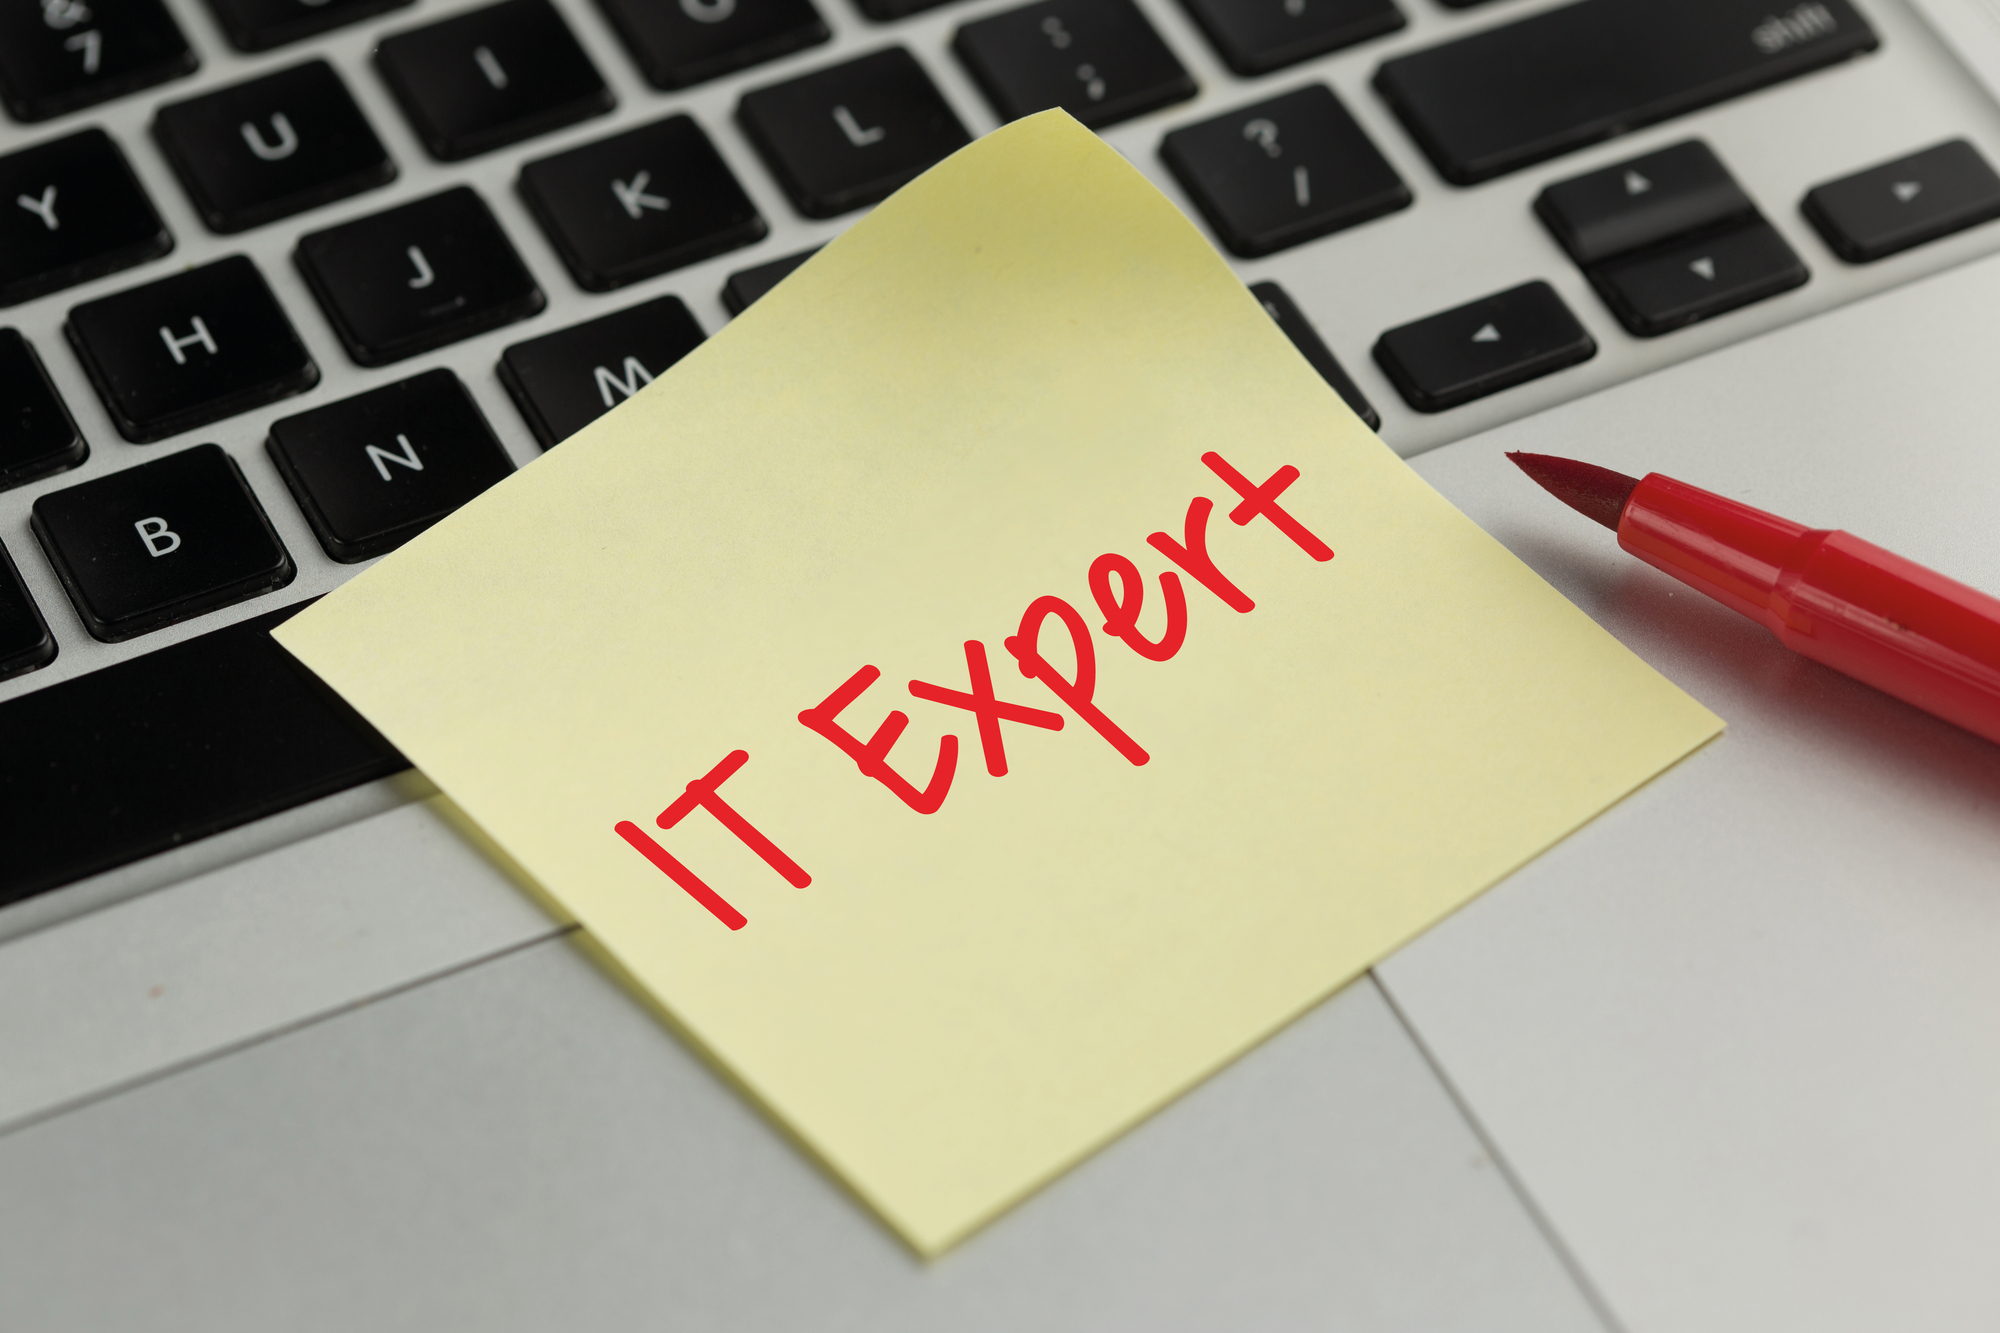 An IT expert's sticky note on a keyboard, symbolizing the concept of what are managed IT services, and the hands-on approach taken by professionals in this field.